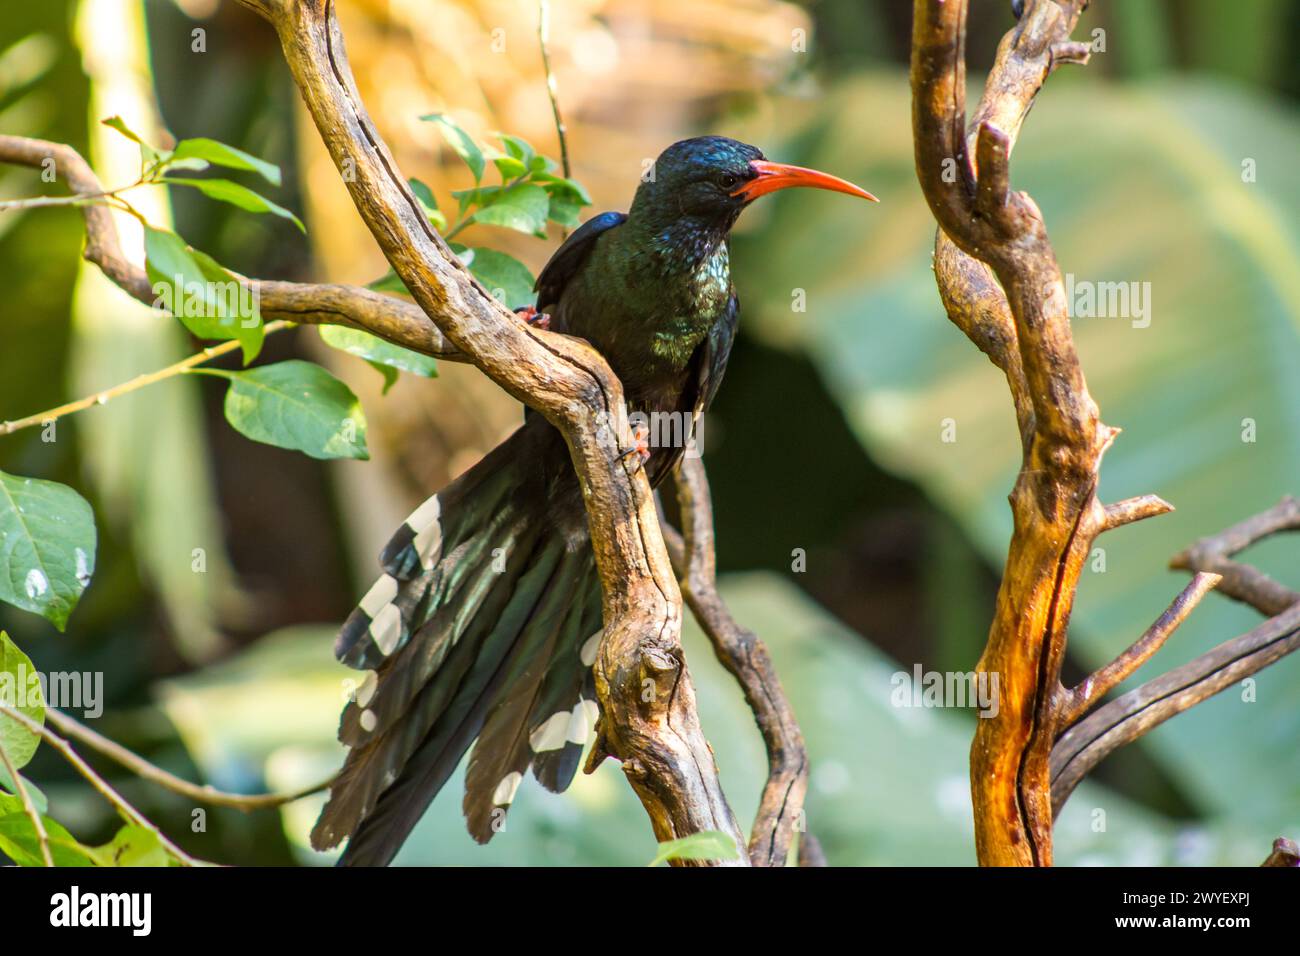 A Green Wood hoopoe, Phoeniculus purpureus, with its tail spread wide, perched among dead branches in the sun in a suburban garden in Johannesburg Stock Photo